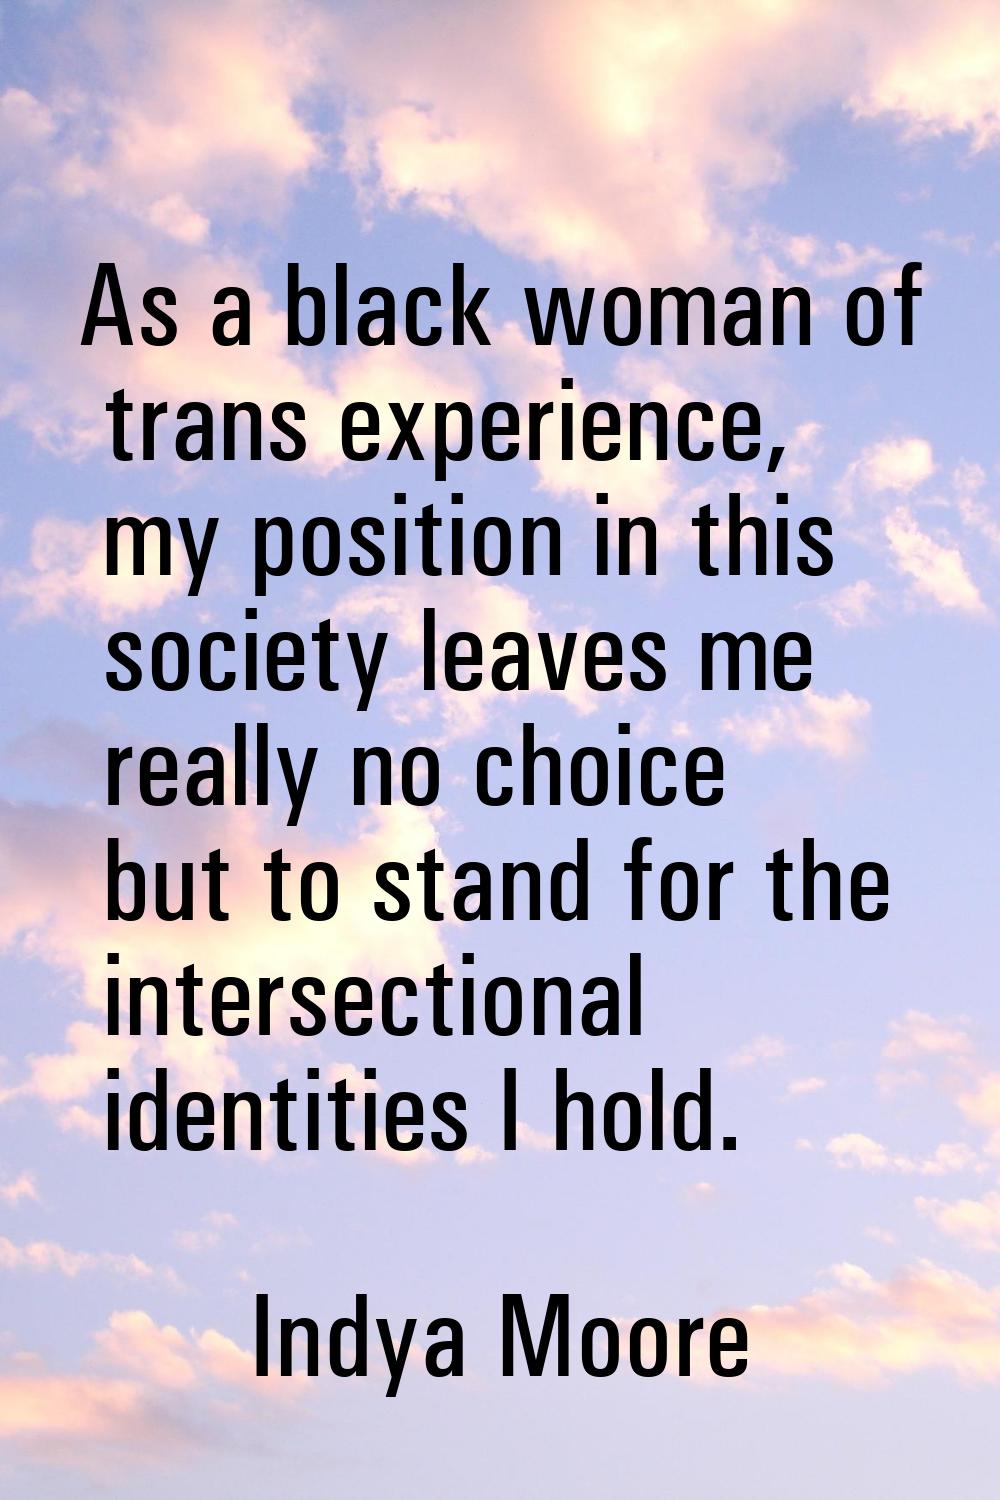 As a black woman of trans experience, my position in this society leaves me really no choice but to